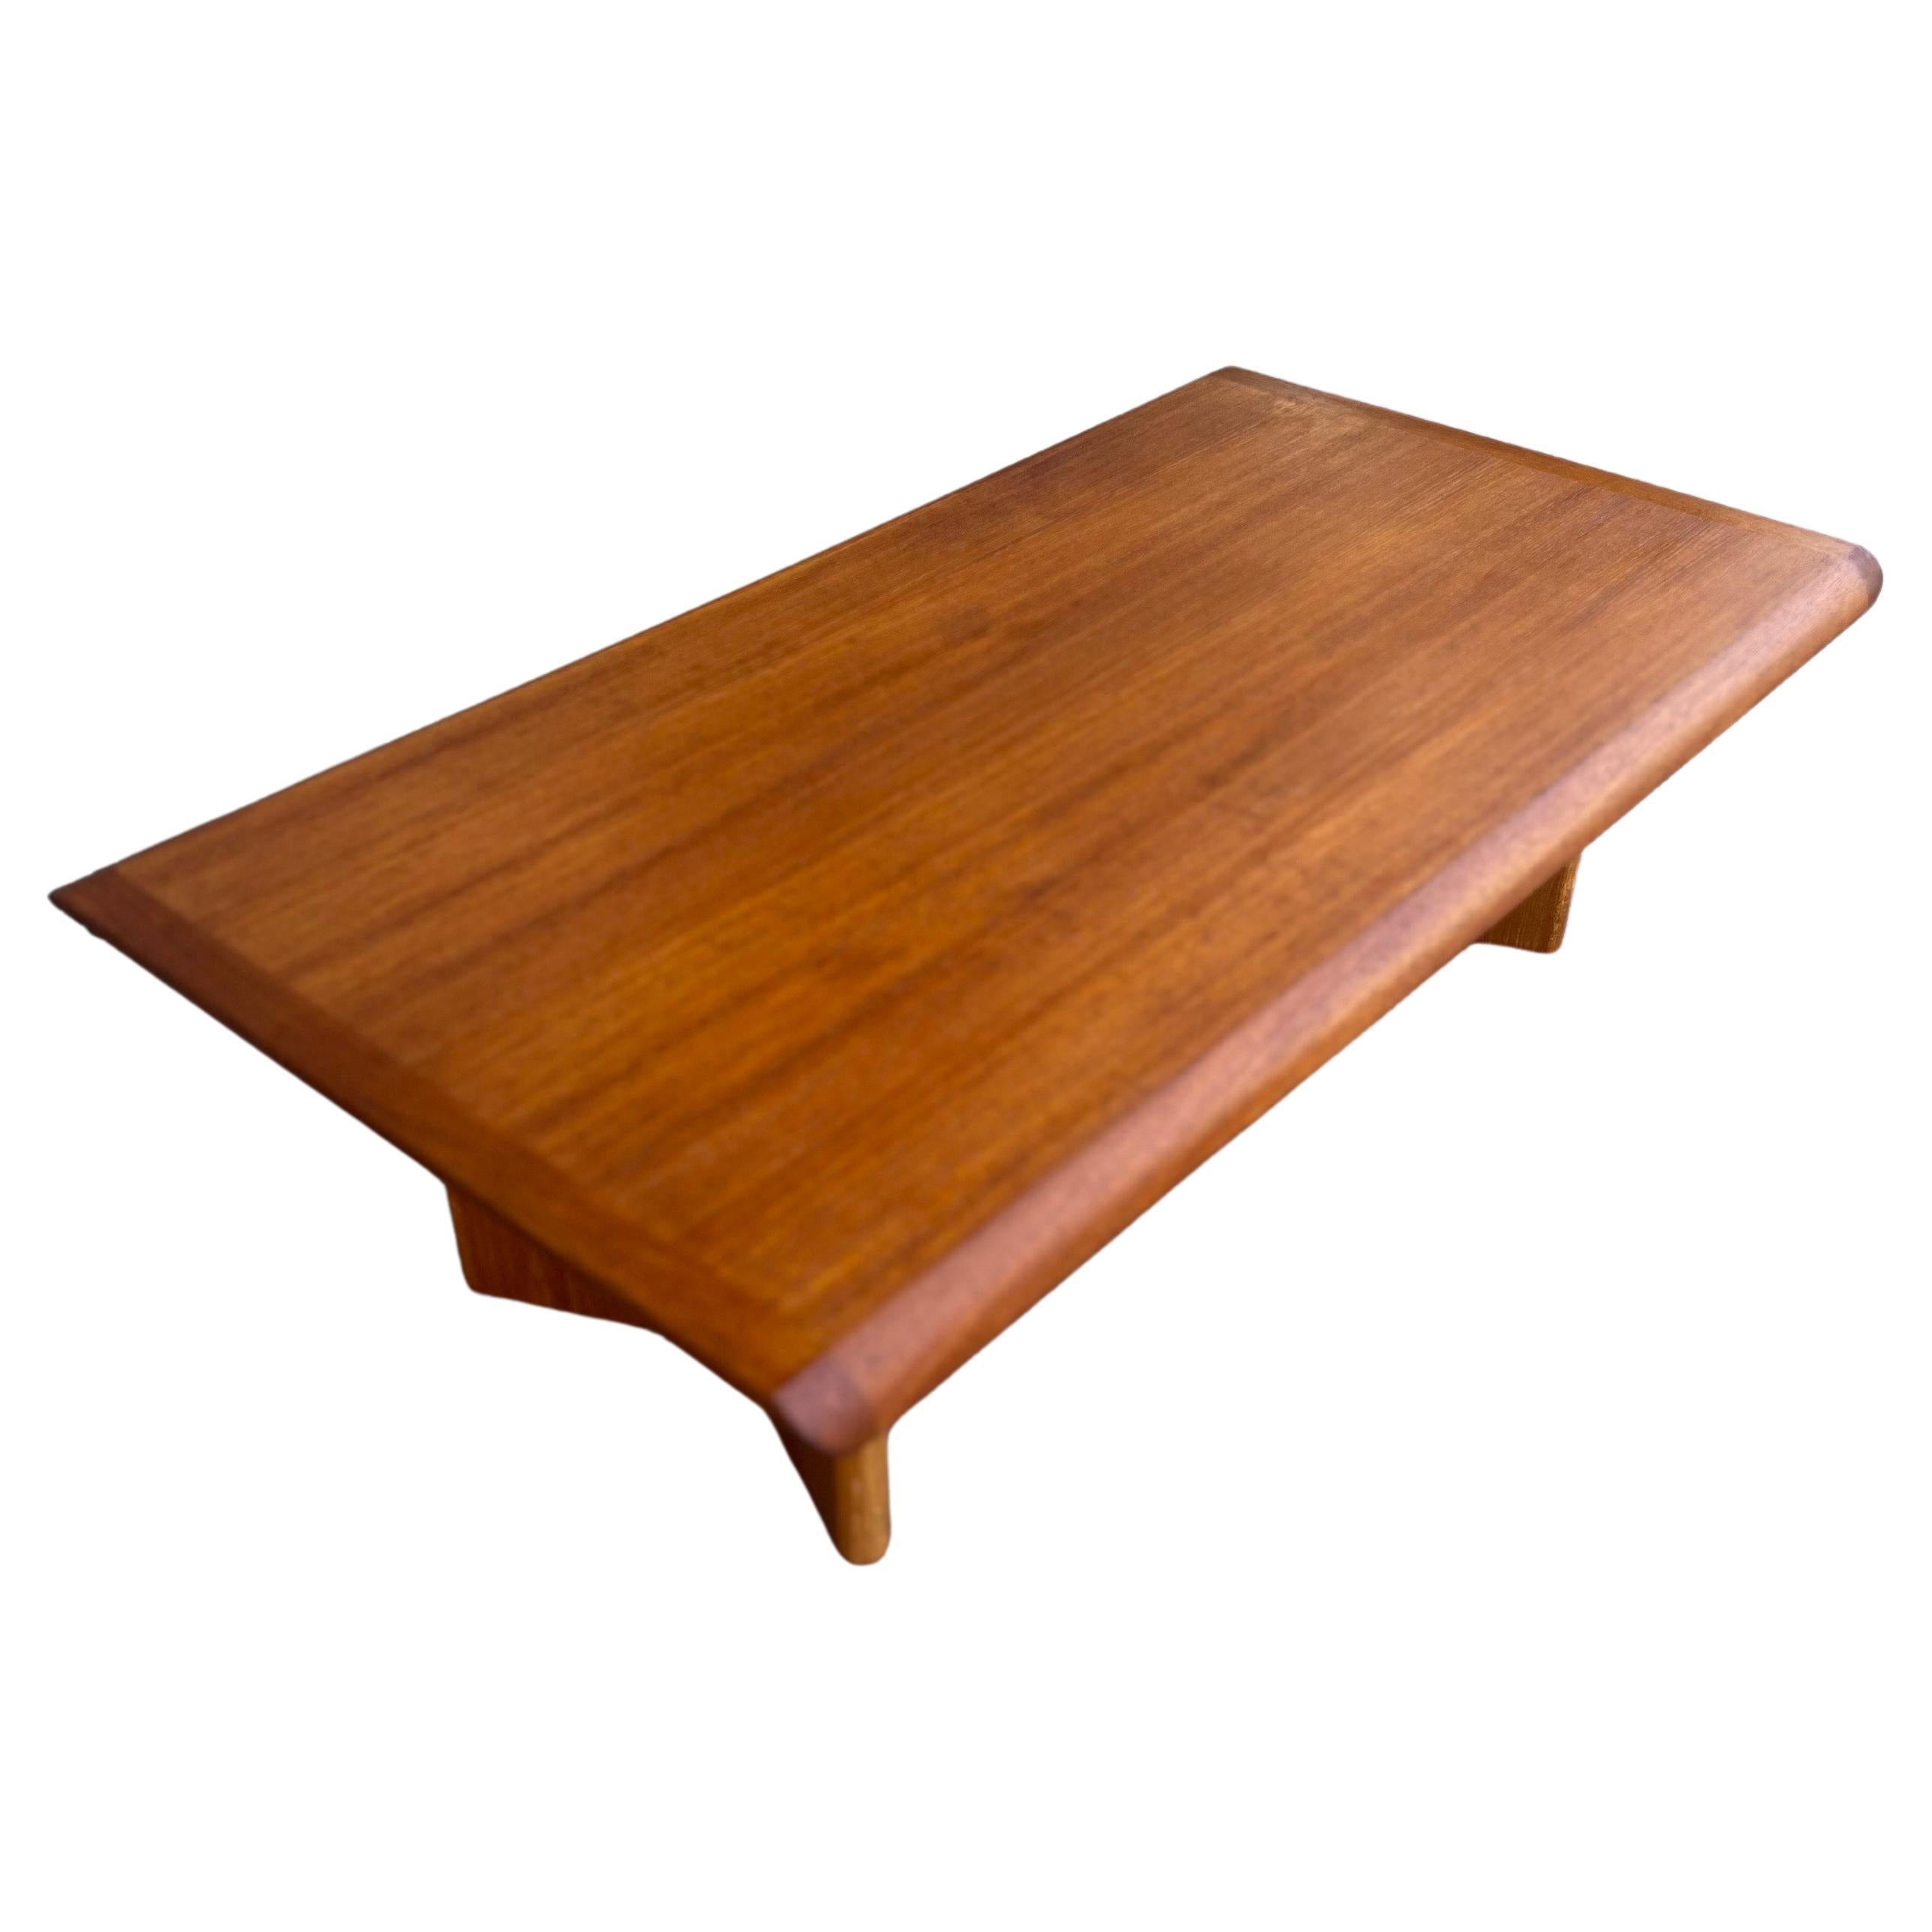 Beautiful Mid-Century Modern large coffee table, by Henning Kjærnullf for Vejle Støle & Møbelfabrik, 1970's. Featuring richly grained, gleaming teak and smooth, clean lines characteristic of classic Danish design, freshly refinished beautiful lines